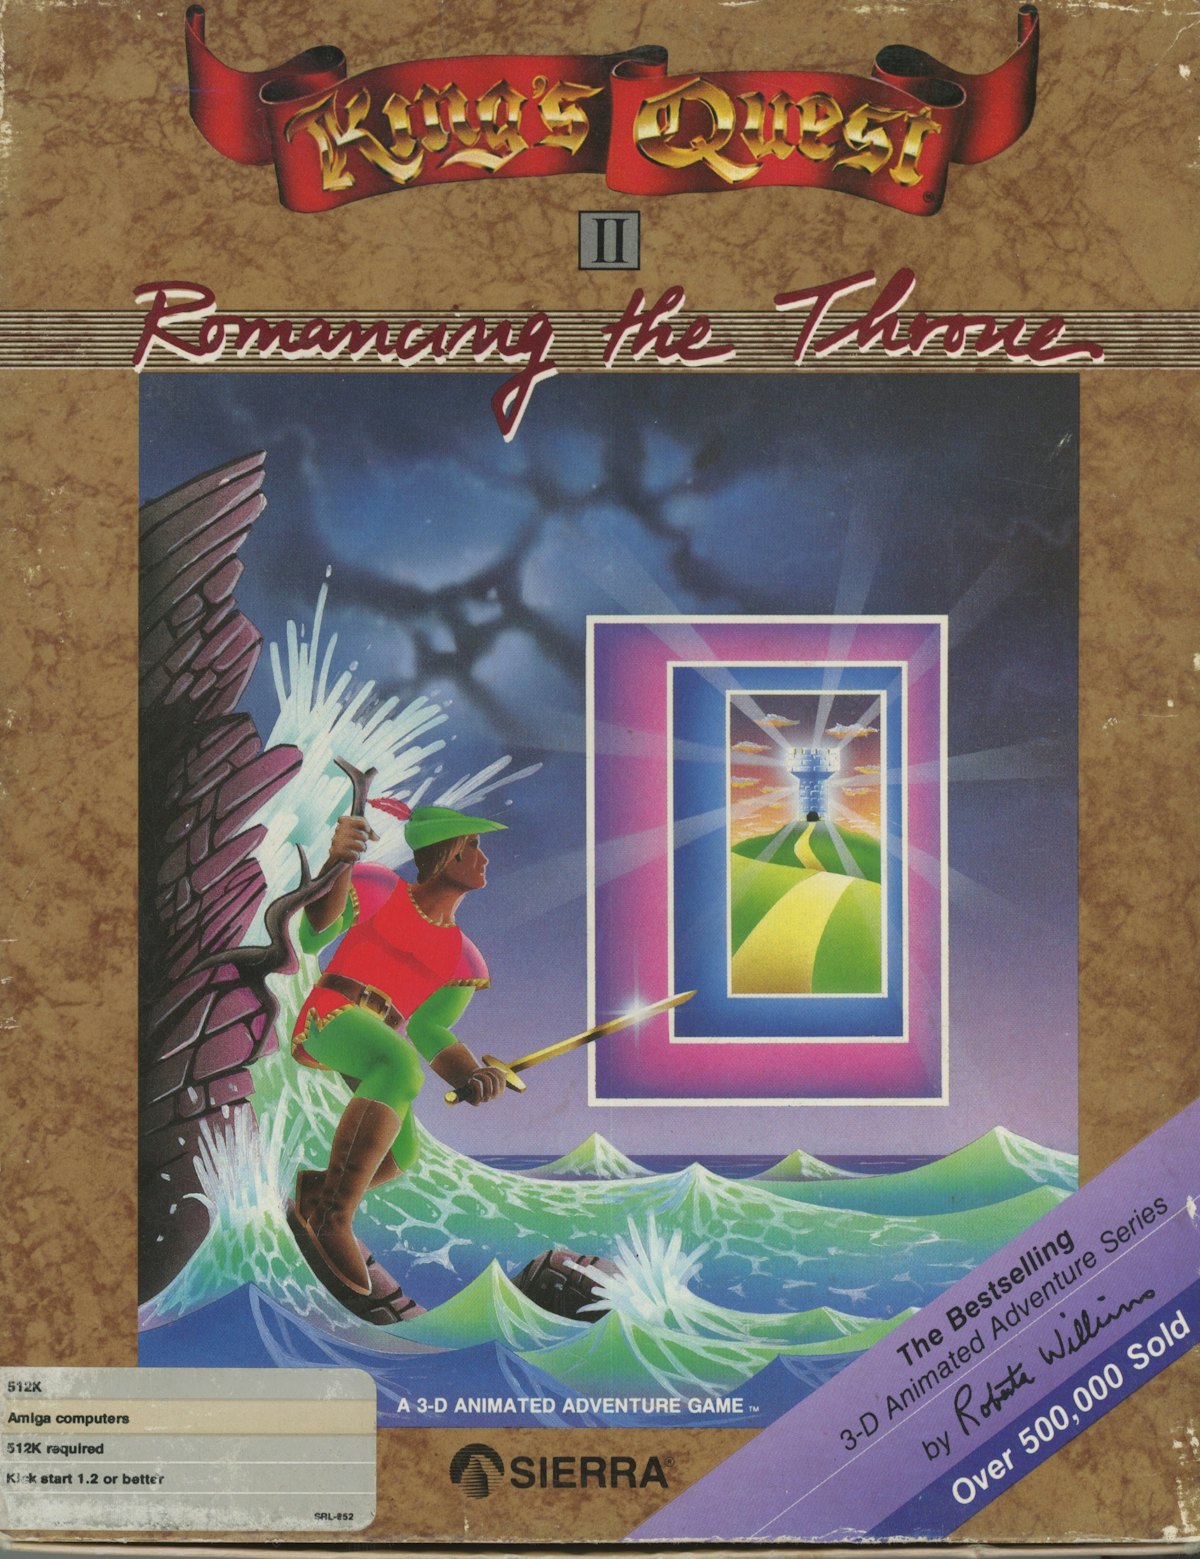 King’s Quest II: Romancing the Throne